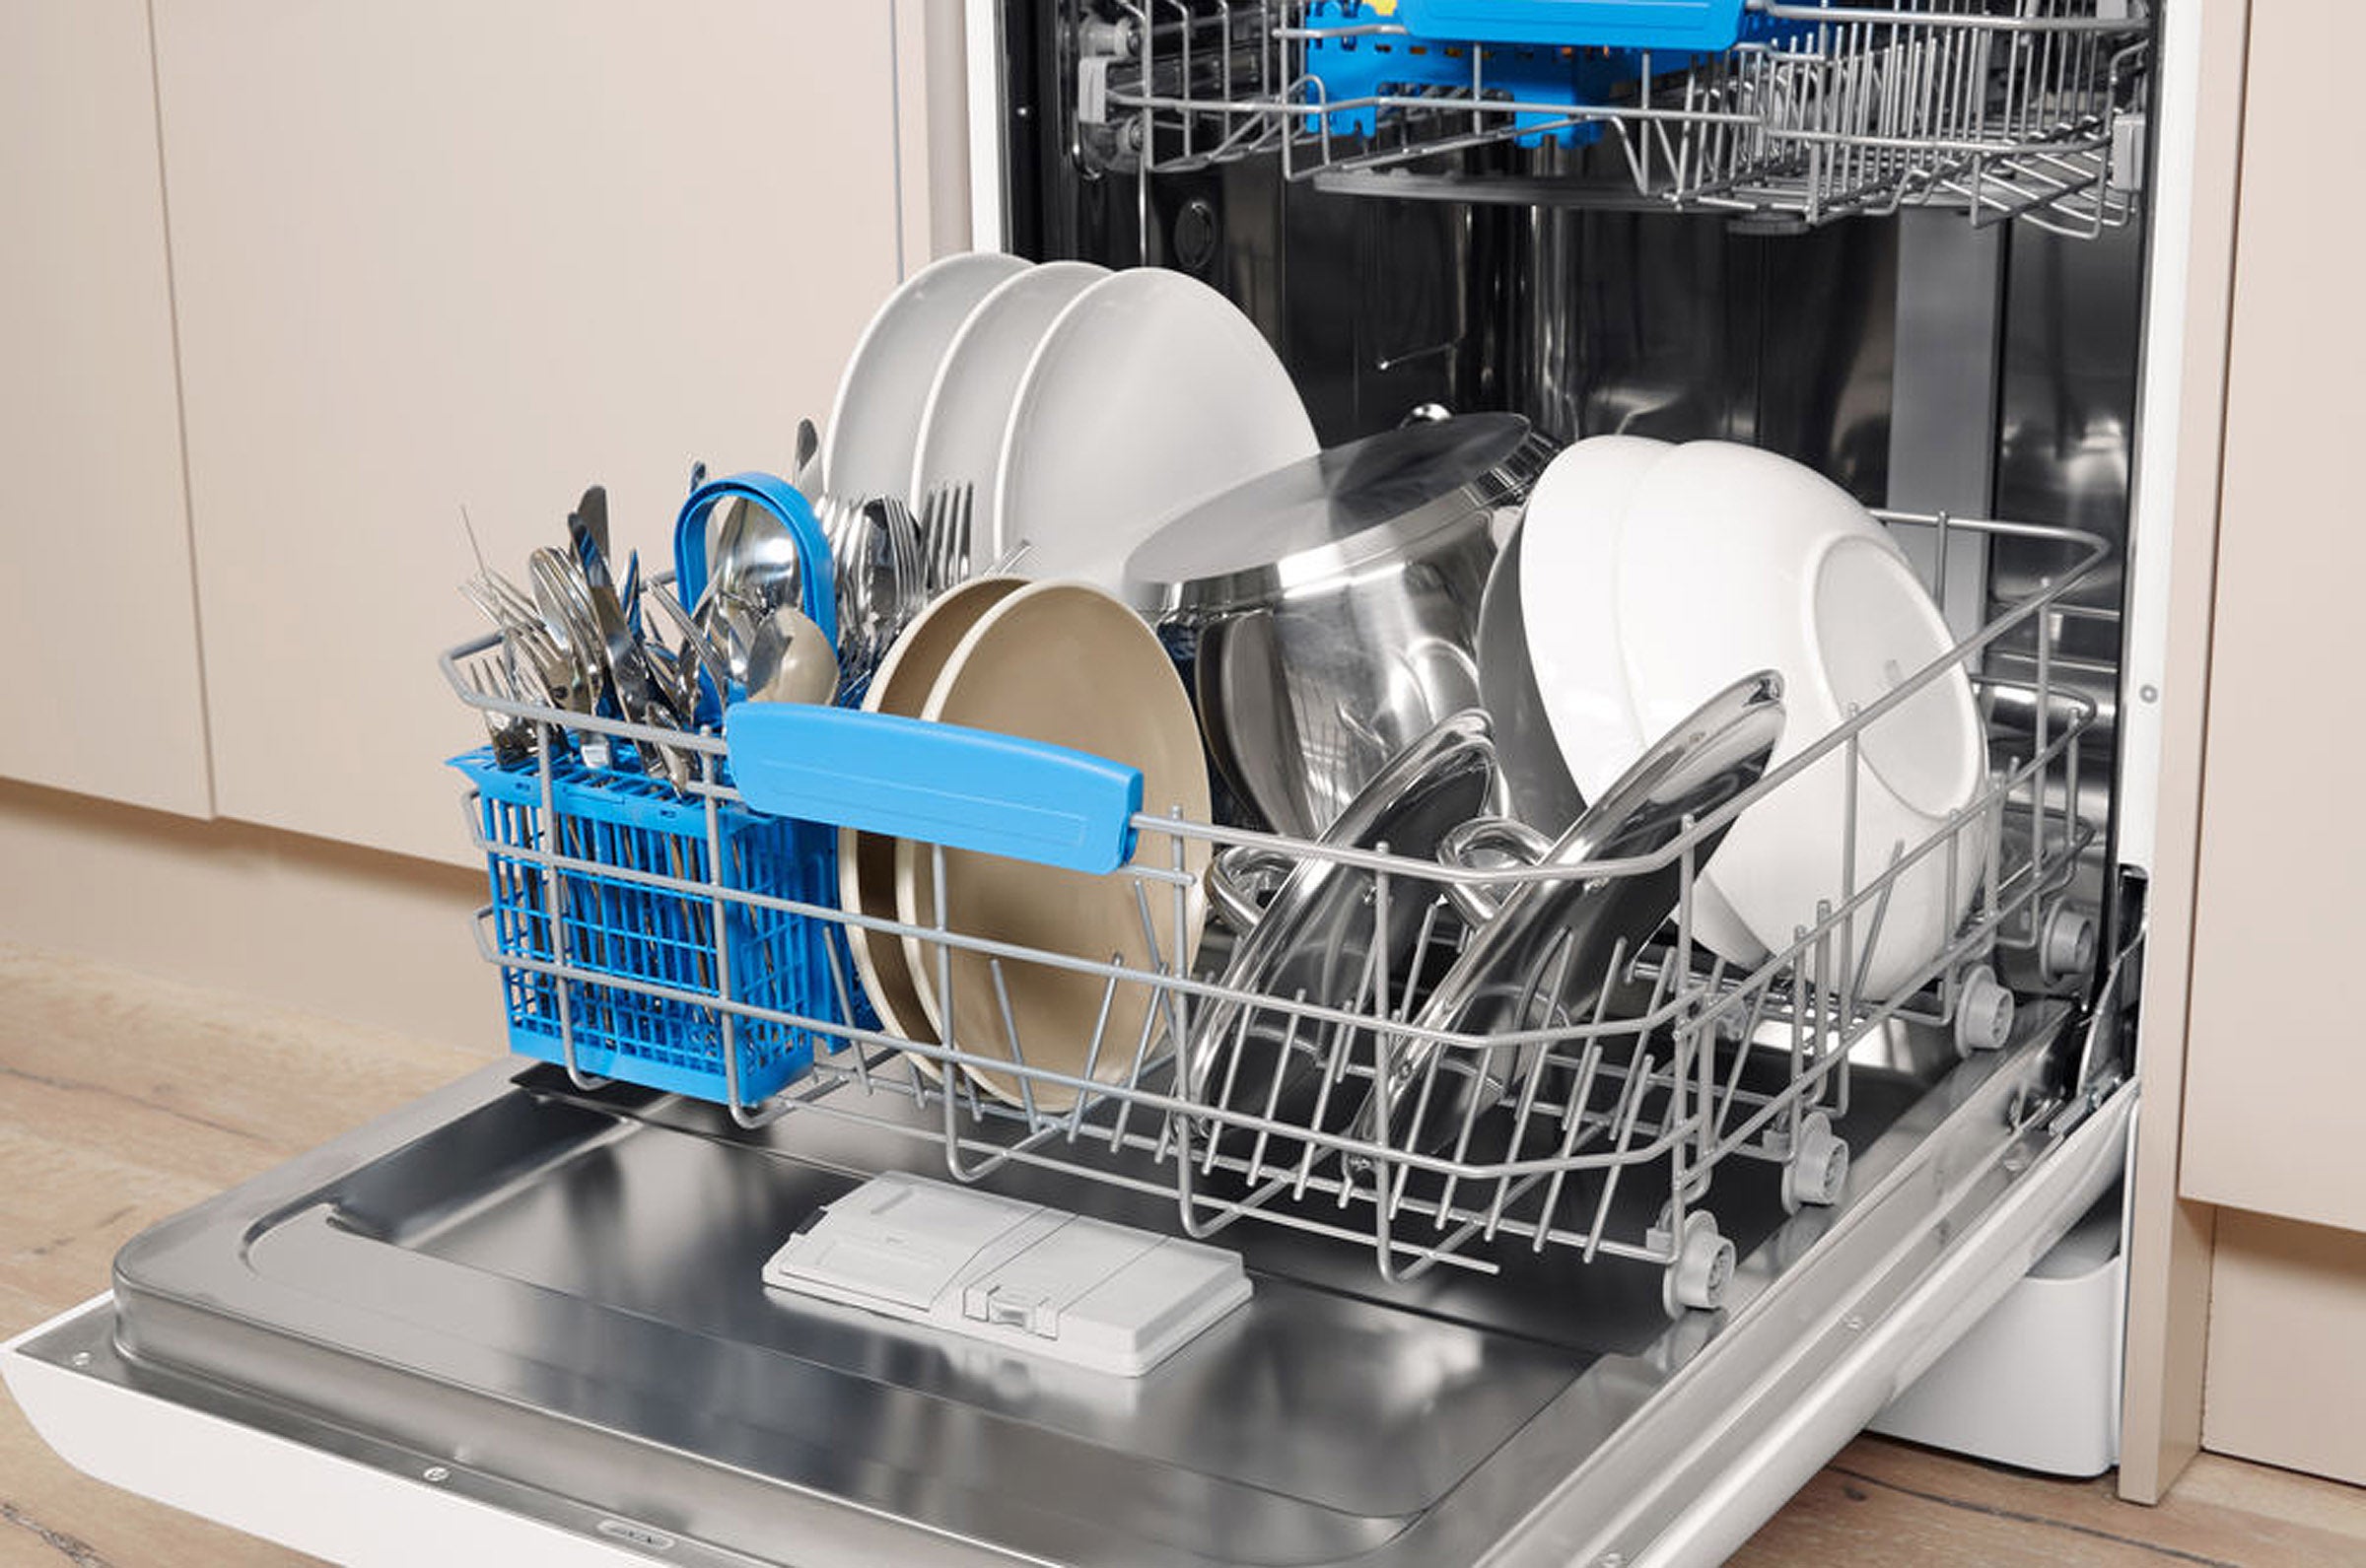 Open Indesit dishwasher with clean dishes inside.